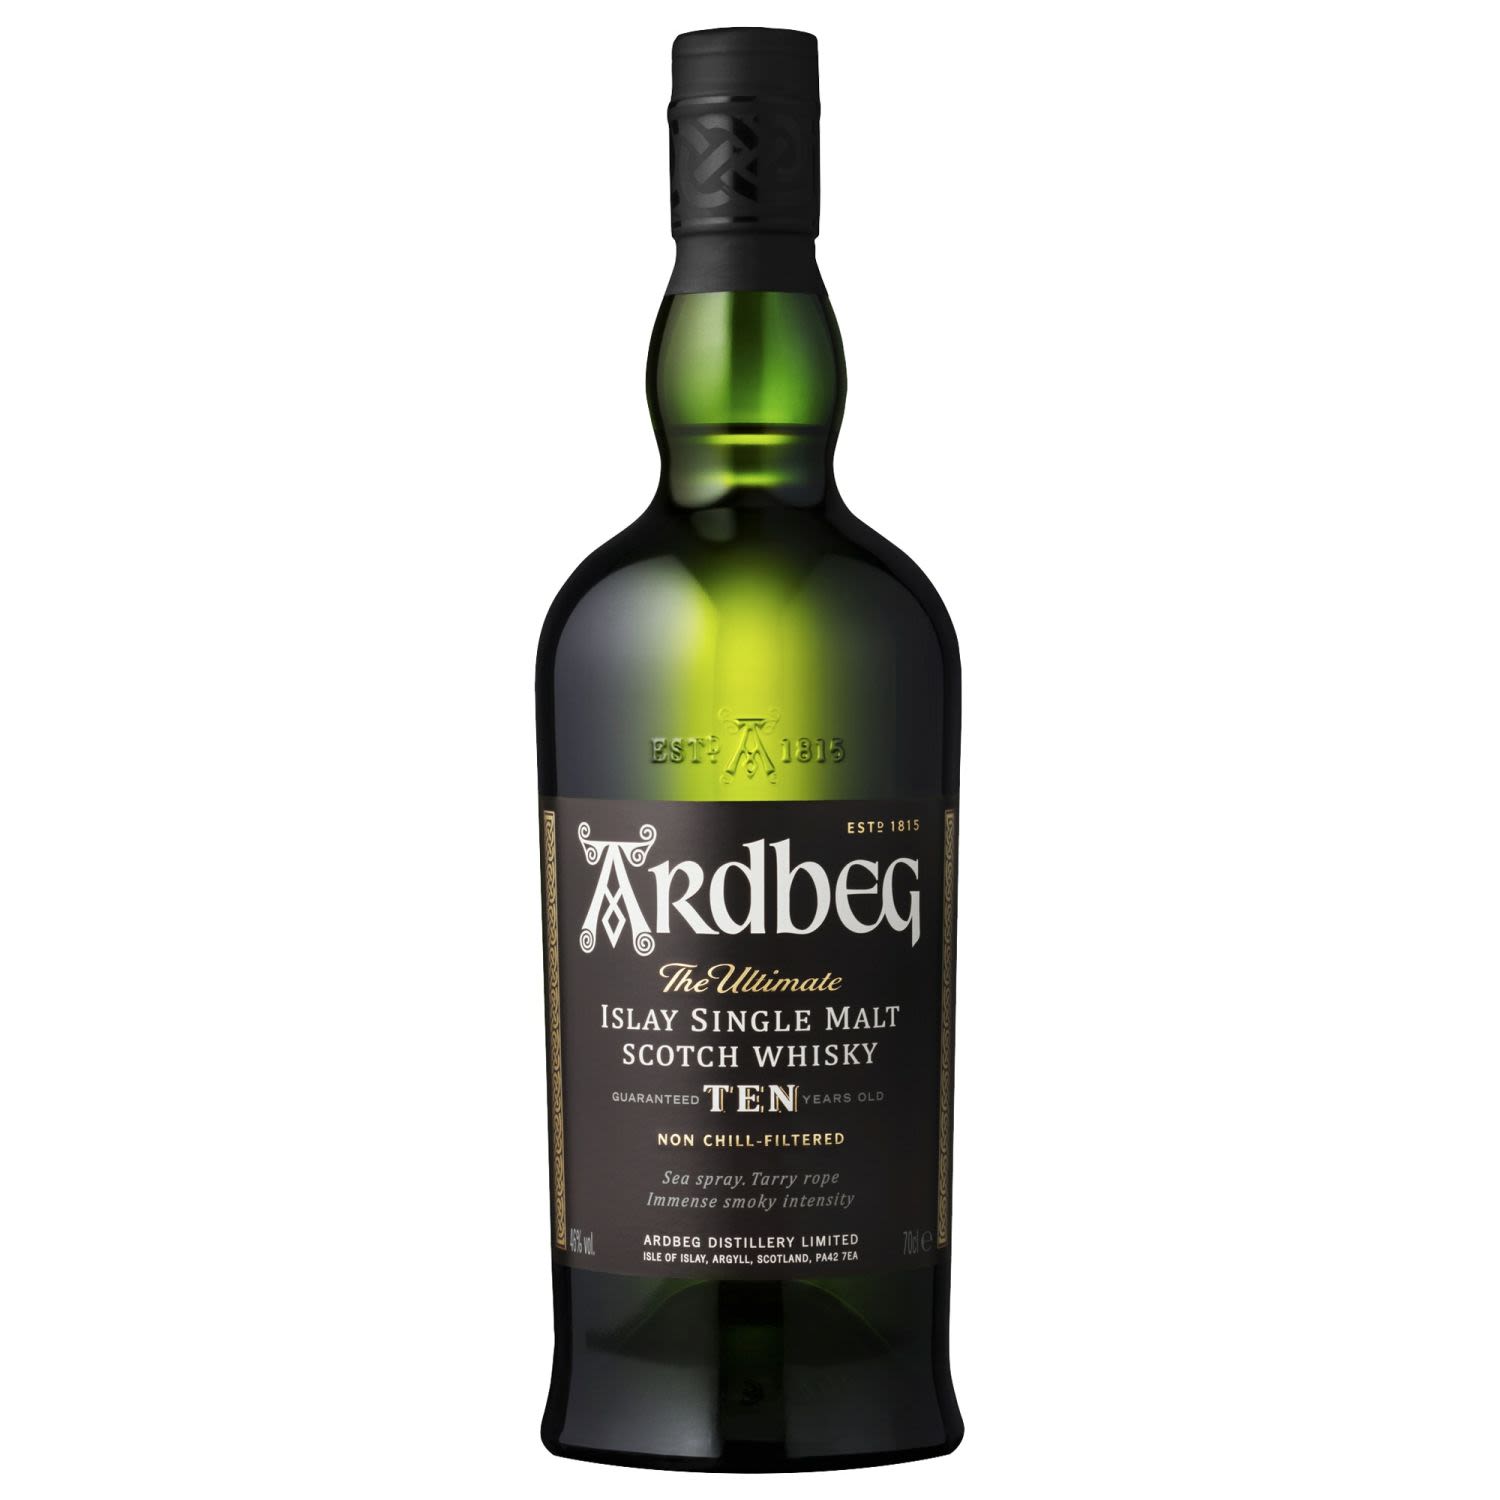 Ardbeg 10 Year Old Single Malt is typical Islay (eye-la). Light gold colour with exceptional balance and depth on the nose. The aroma is a beguiling mix of toffee and chocolate sweetness, cinnamon spice, Fresh citrus and floral notes of white wine are evident, as are melon, pear drops and a gentle creaminess. There is also fresh phenolics of seaspray and smoked fish. Hickory and coffee emerge on the finish.<br /> <br />Alcohol Volume: 46.00%<br /><br />Pack Format: Bottle<br /><br />Standard Drinks: 25</br /><br />Pack Type: Bottle<br /><br />Country of Origin: Scotland<br />